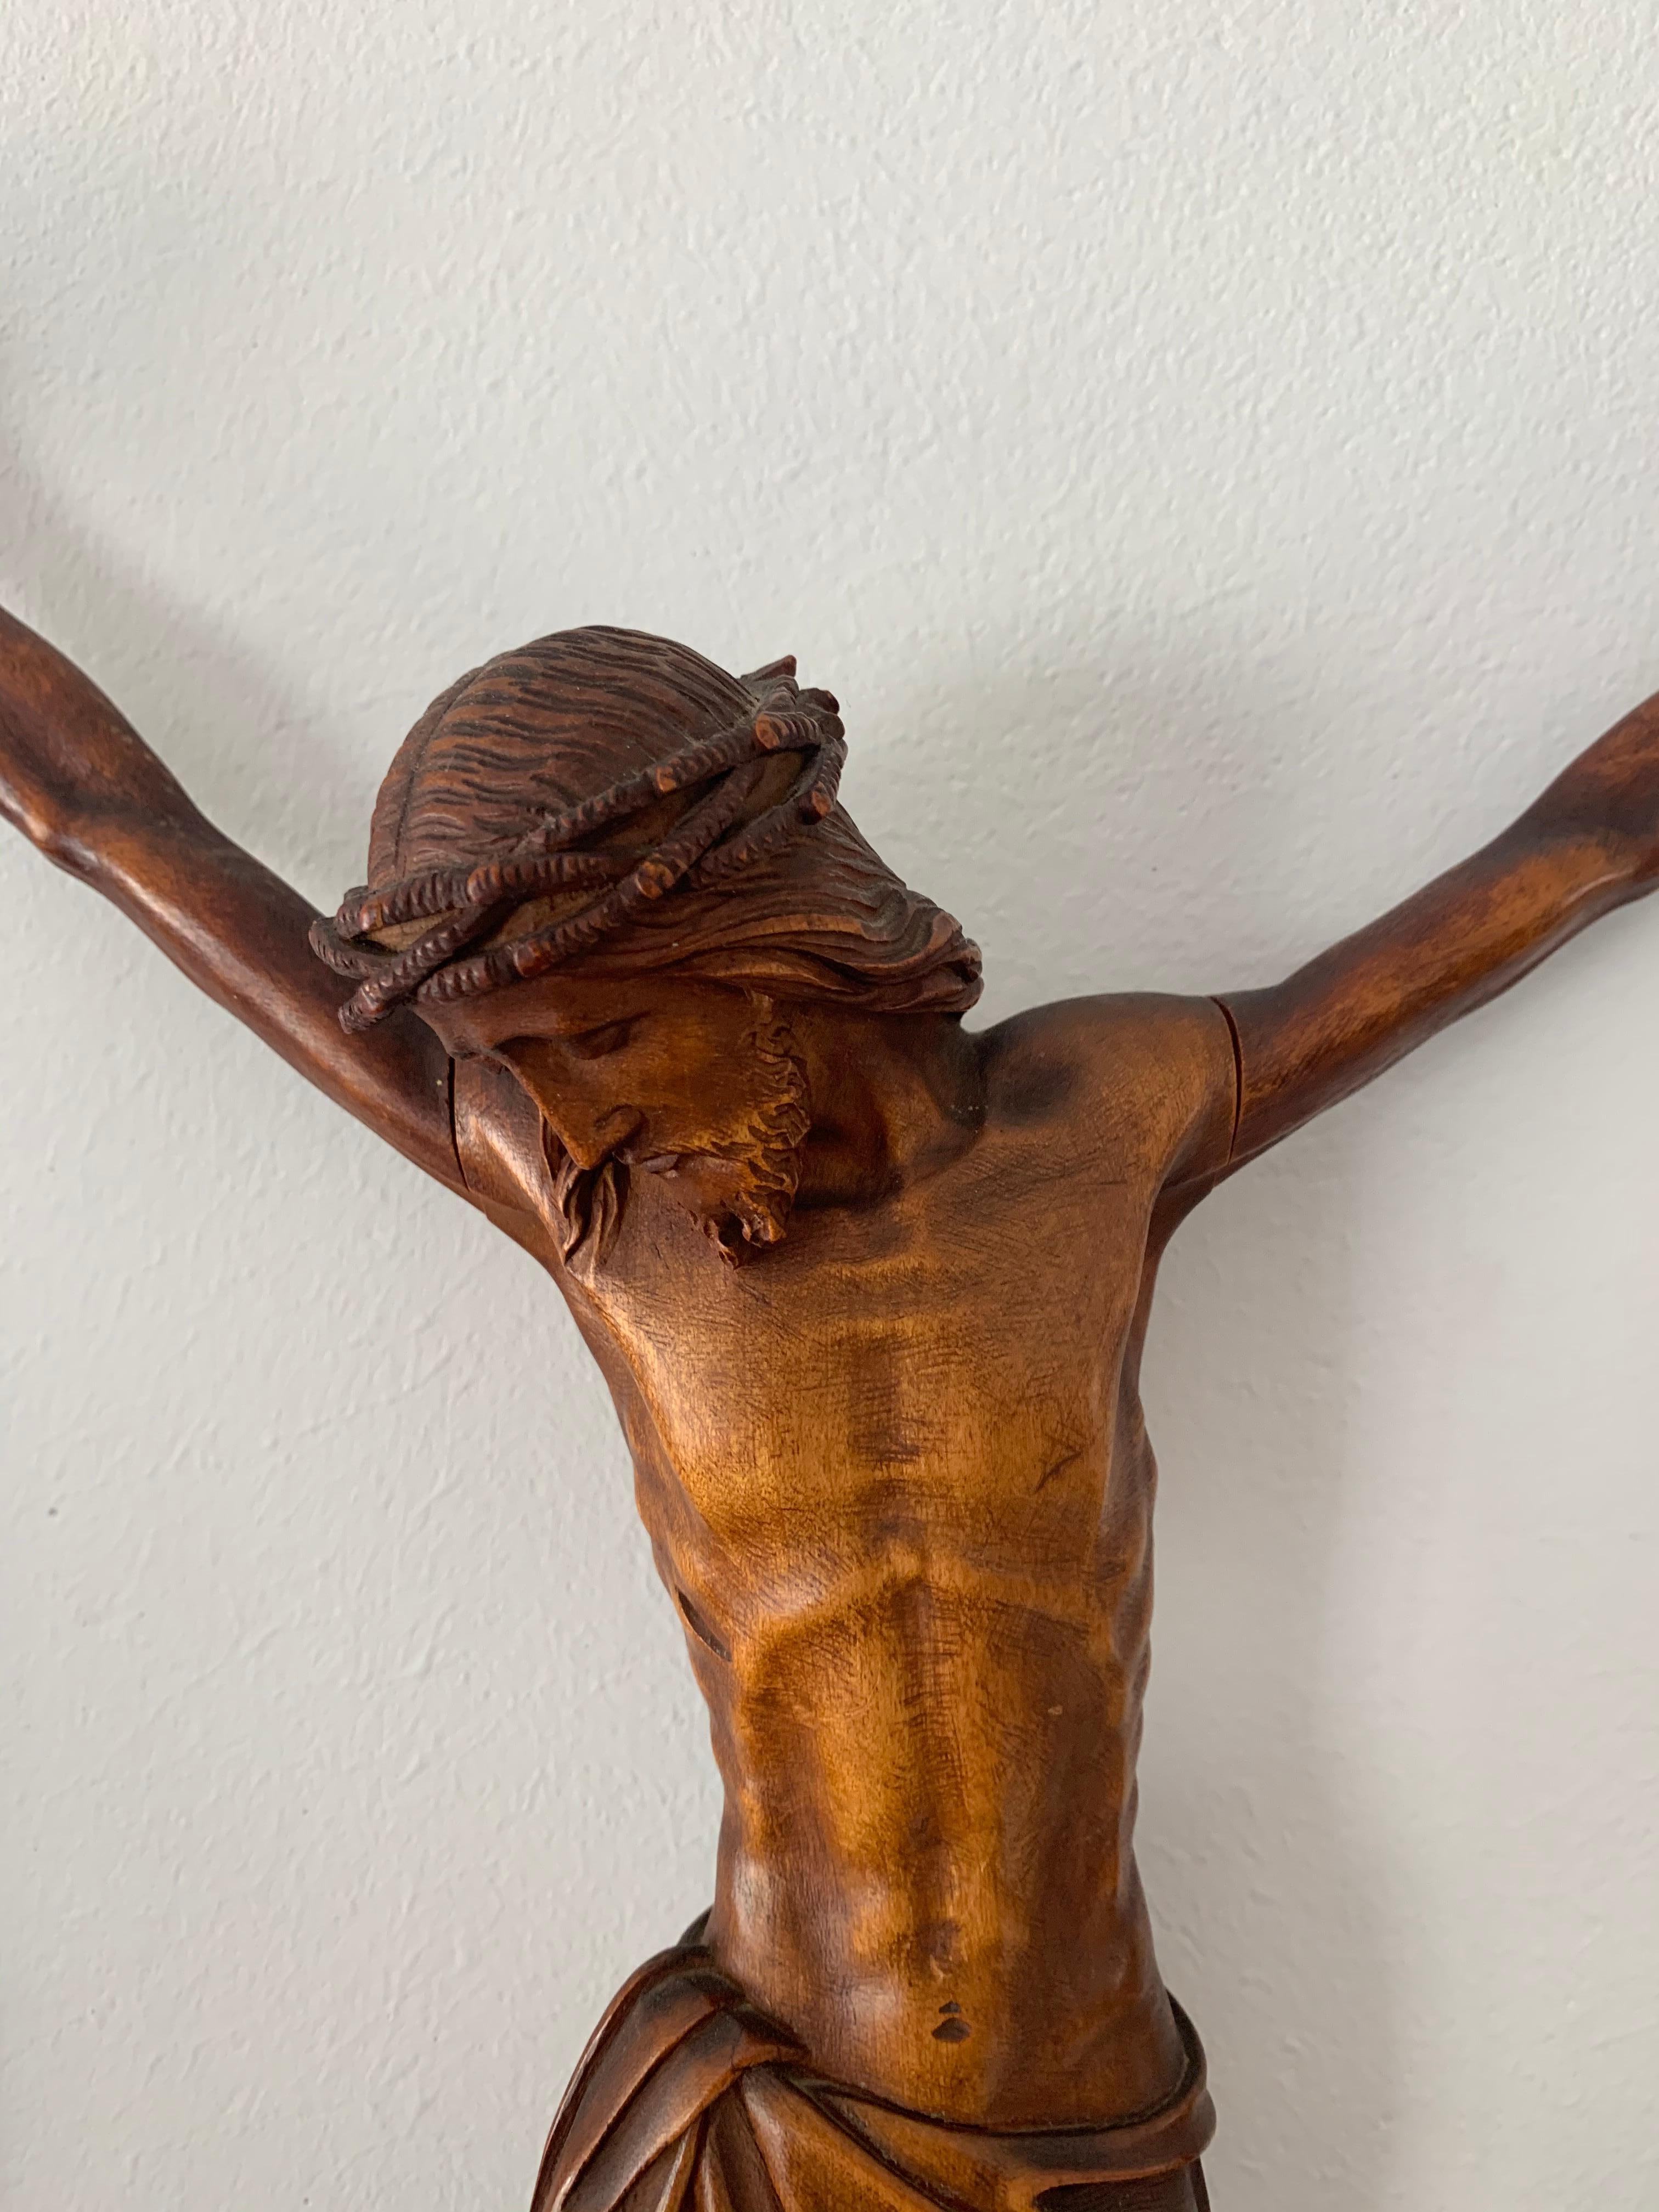 Early 1900s Finest Handcarved Wood Corpus of Christ Sculpture for Wall Mounting 11